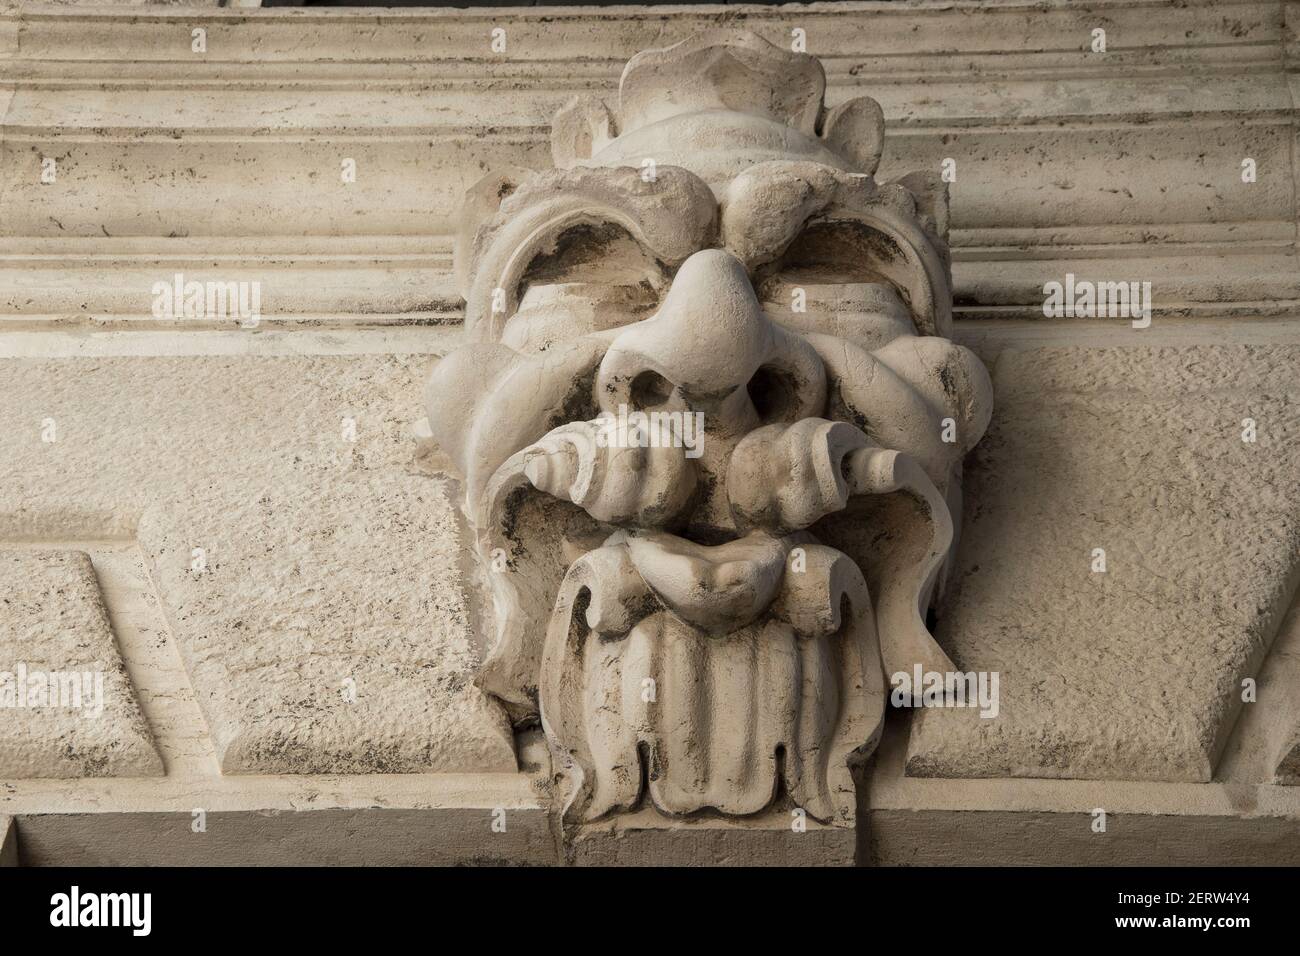 Sculpture in the streets of the city of Venice, Italy, Europe. Stock Photo